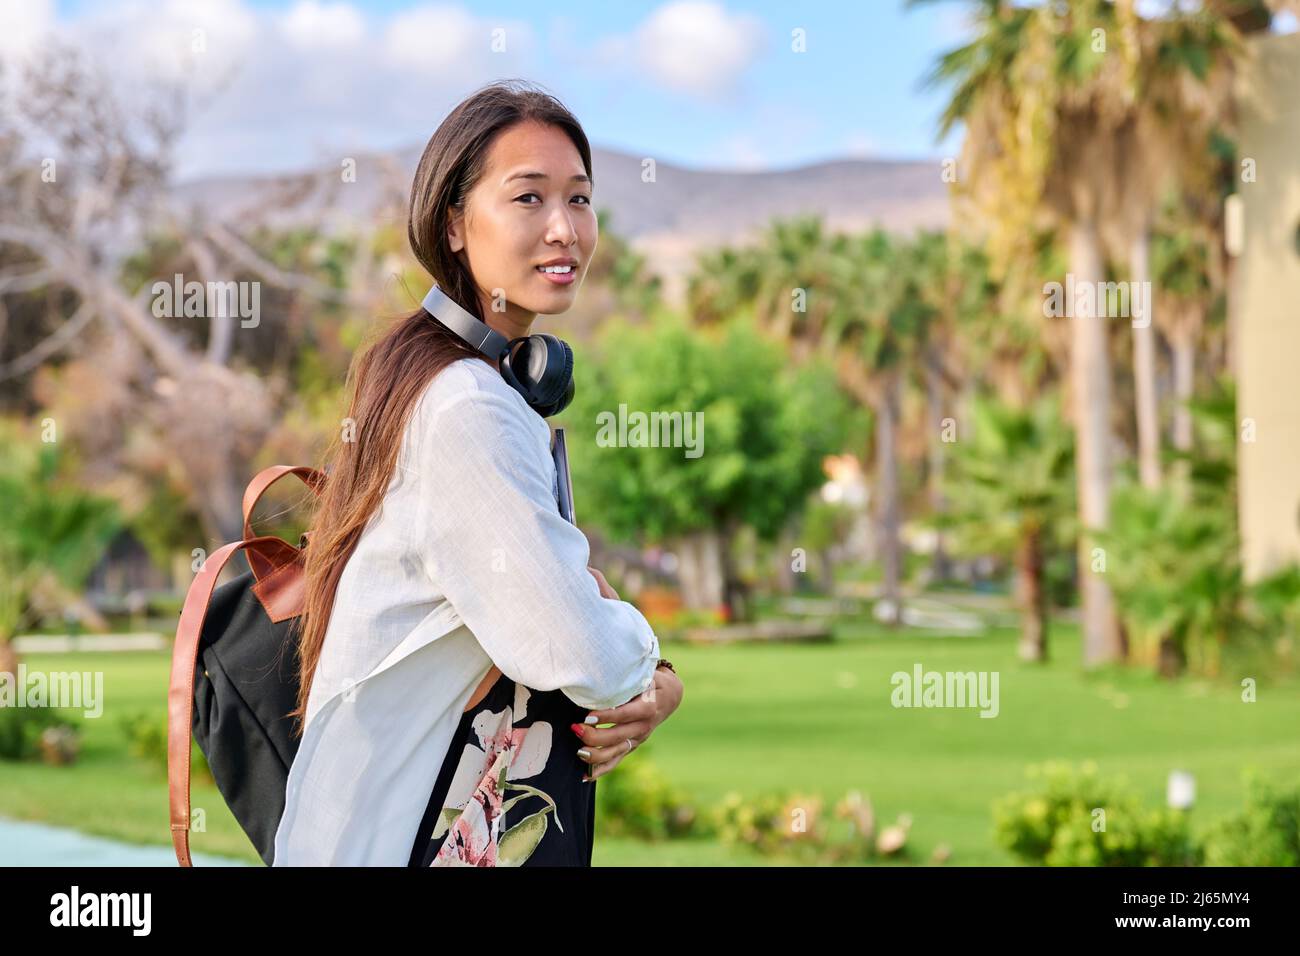 Outdoor portrait of asian female student with backpack headphones laptop looking at camera Stock Photo